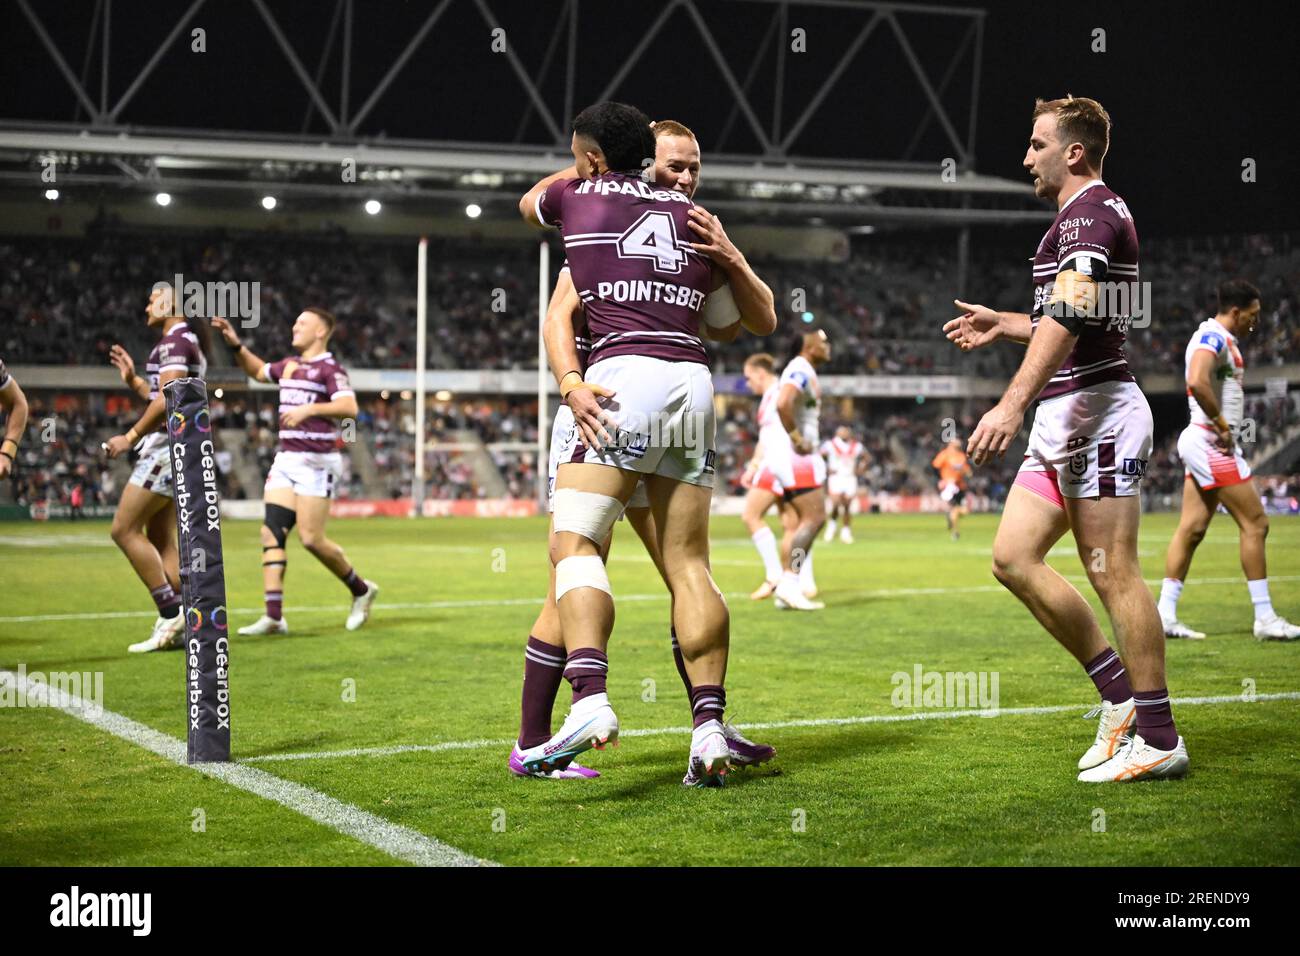 https://c8.alamy.com/comp/2RENDY9/wollongong-australia-29th-july-2023-tolutau-koula-of-the-sea-eagles-celebetrates-after-scoring-a-try-during-the-nrl-round-22-match-between-the-st-george-illawarra-dragons-and-the-manly-warringah-sea-eagles-at-win-stadium-in-wollongong-saturday-july-29-2023-aap-imagedean-lewins-no-archiving-editorial-use-only-credit-australian-associated-pressalamy-live-news-2RENDY9.jpg